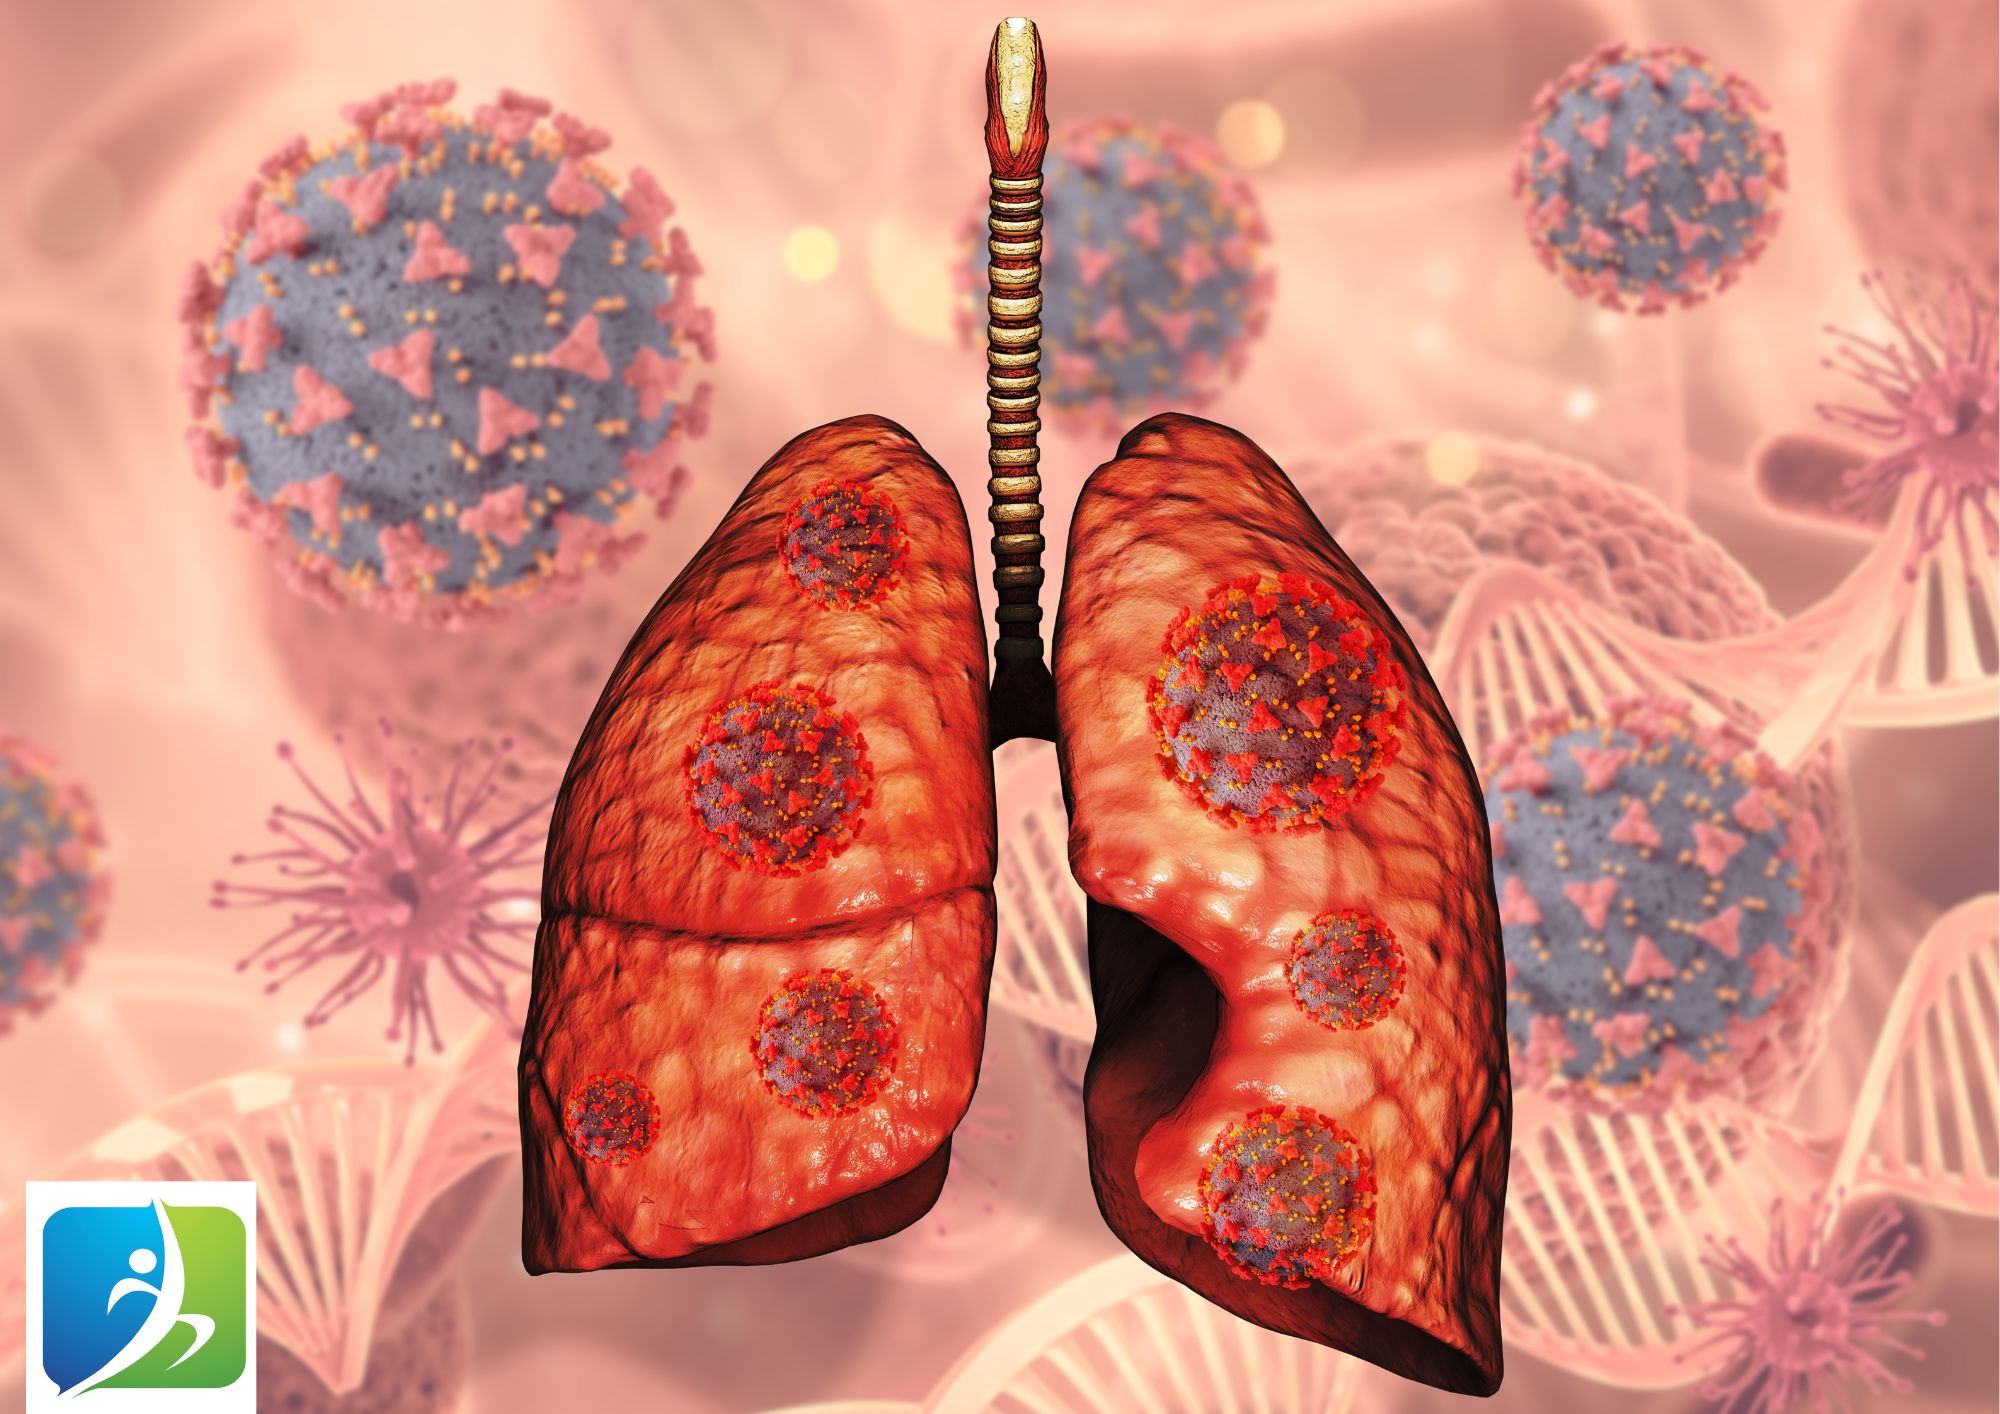 Should you consider Bioresonance Technology for Allergies and Respiratory Diseases?